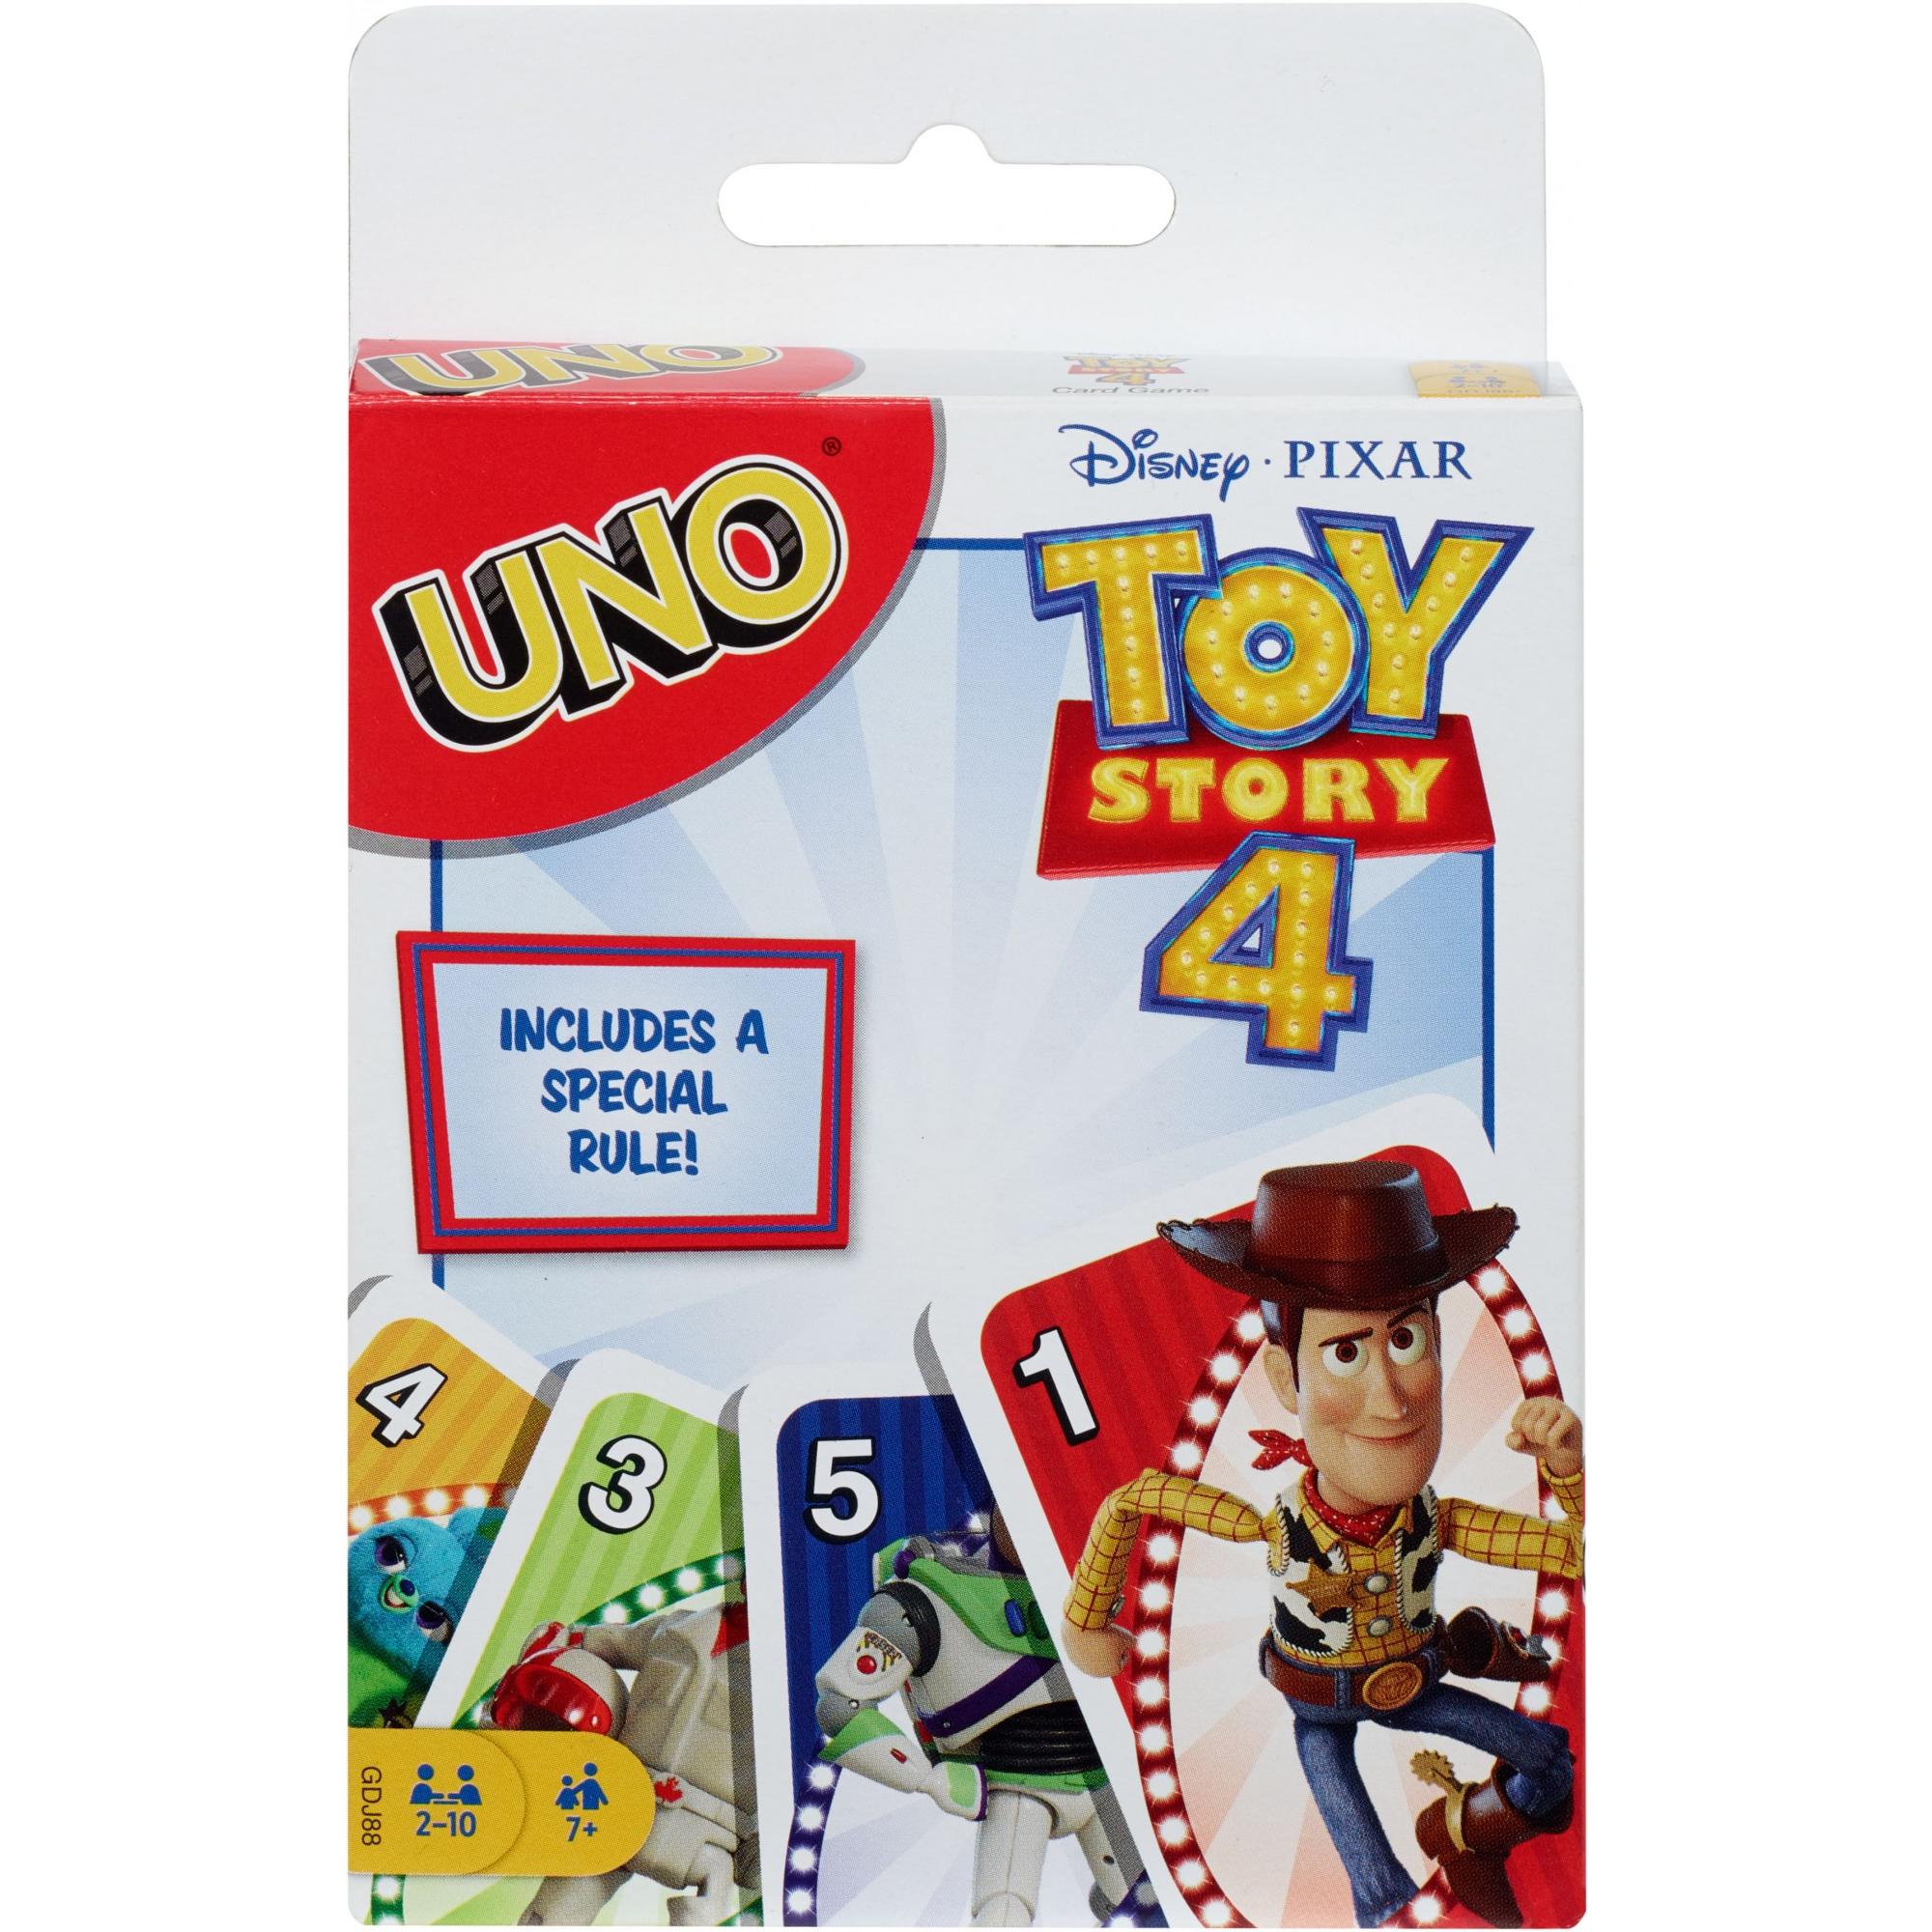 UNO Disney Pixar Toy Story Themed Card Game for 2-10 Players Ages 7Y+ - image 1 of 2